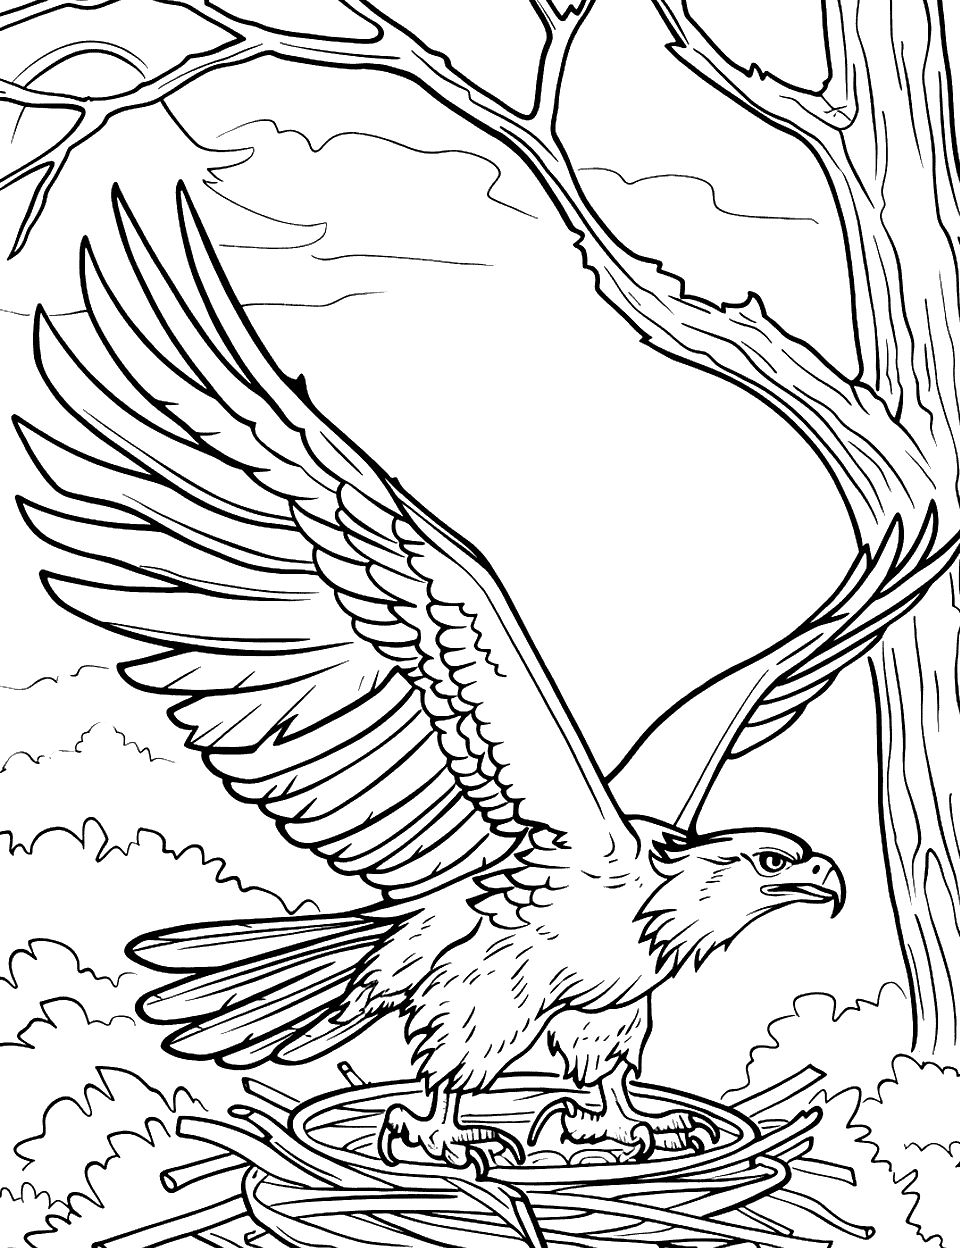 Eagle Returning to Its Nest Coloring Page - An eagle returns to its nest set against a simple forest backdrop.